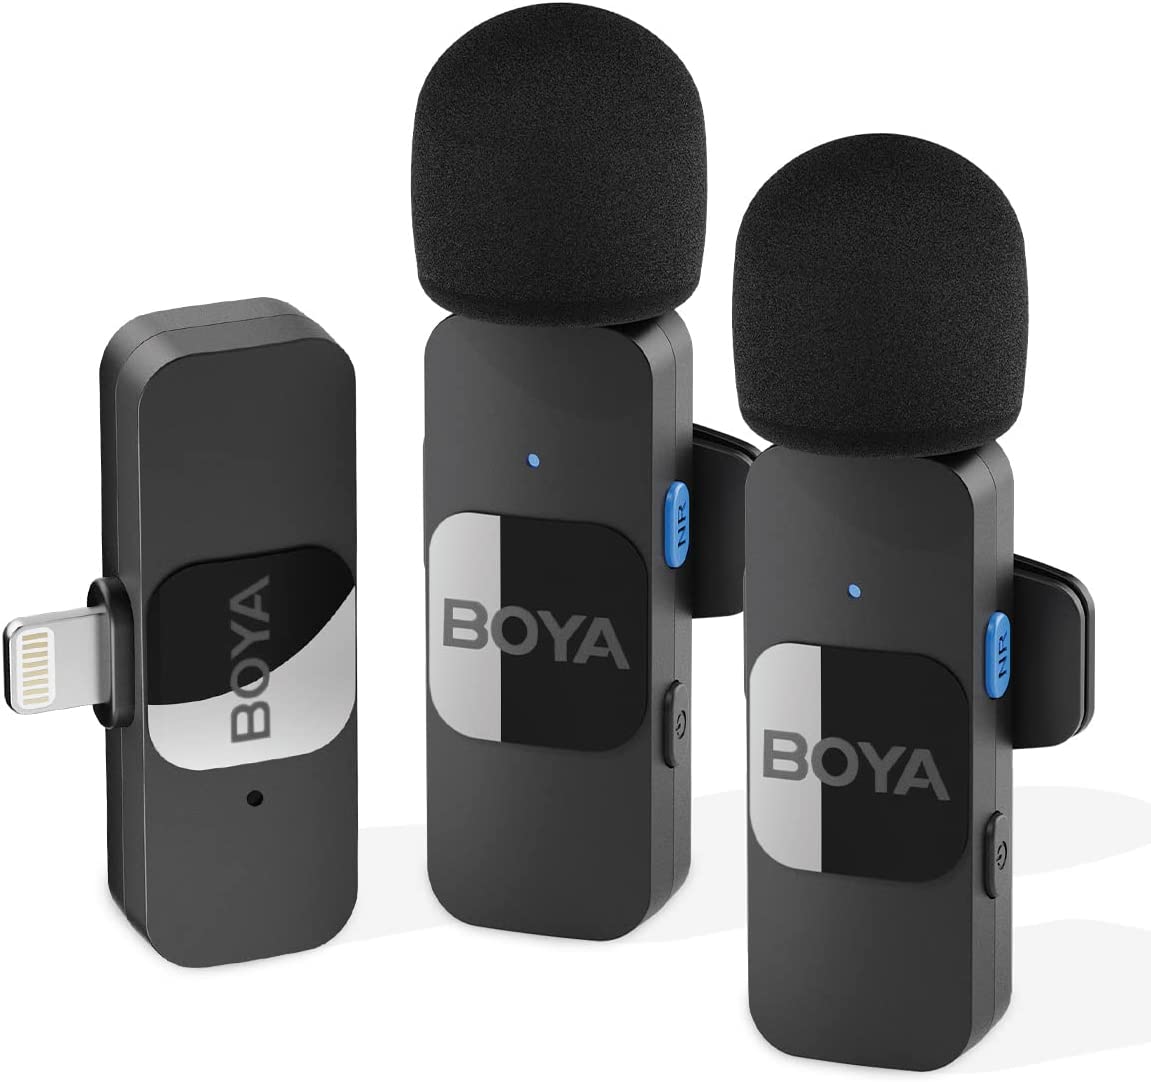 BOYA by-V2 Wireless Microphone for iPhone,2.4GHz Plug Play Mnini Clip-on Mic for iPhone 14/14 Pro/13/13 Pro/12 iPad iOS Devices Vlogging YouTube Video Recording Podcast Interview